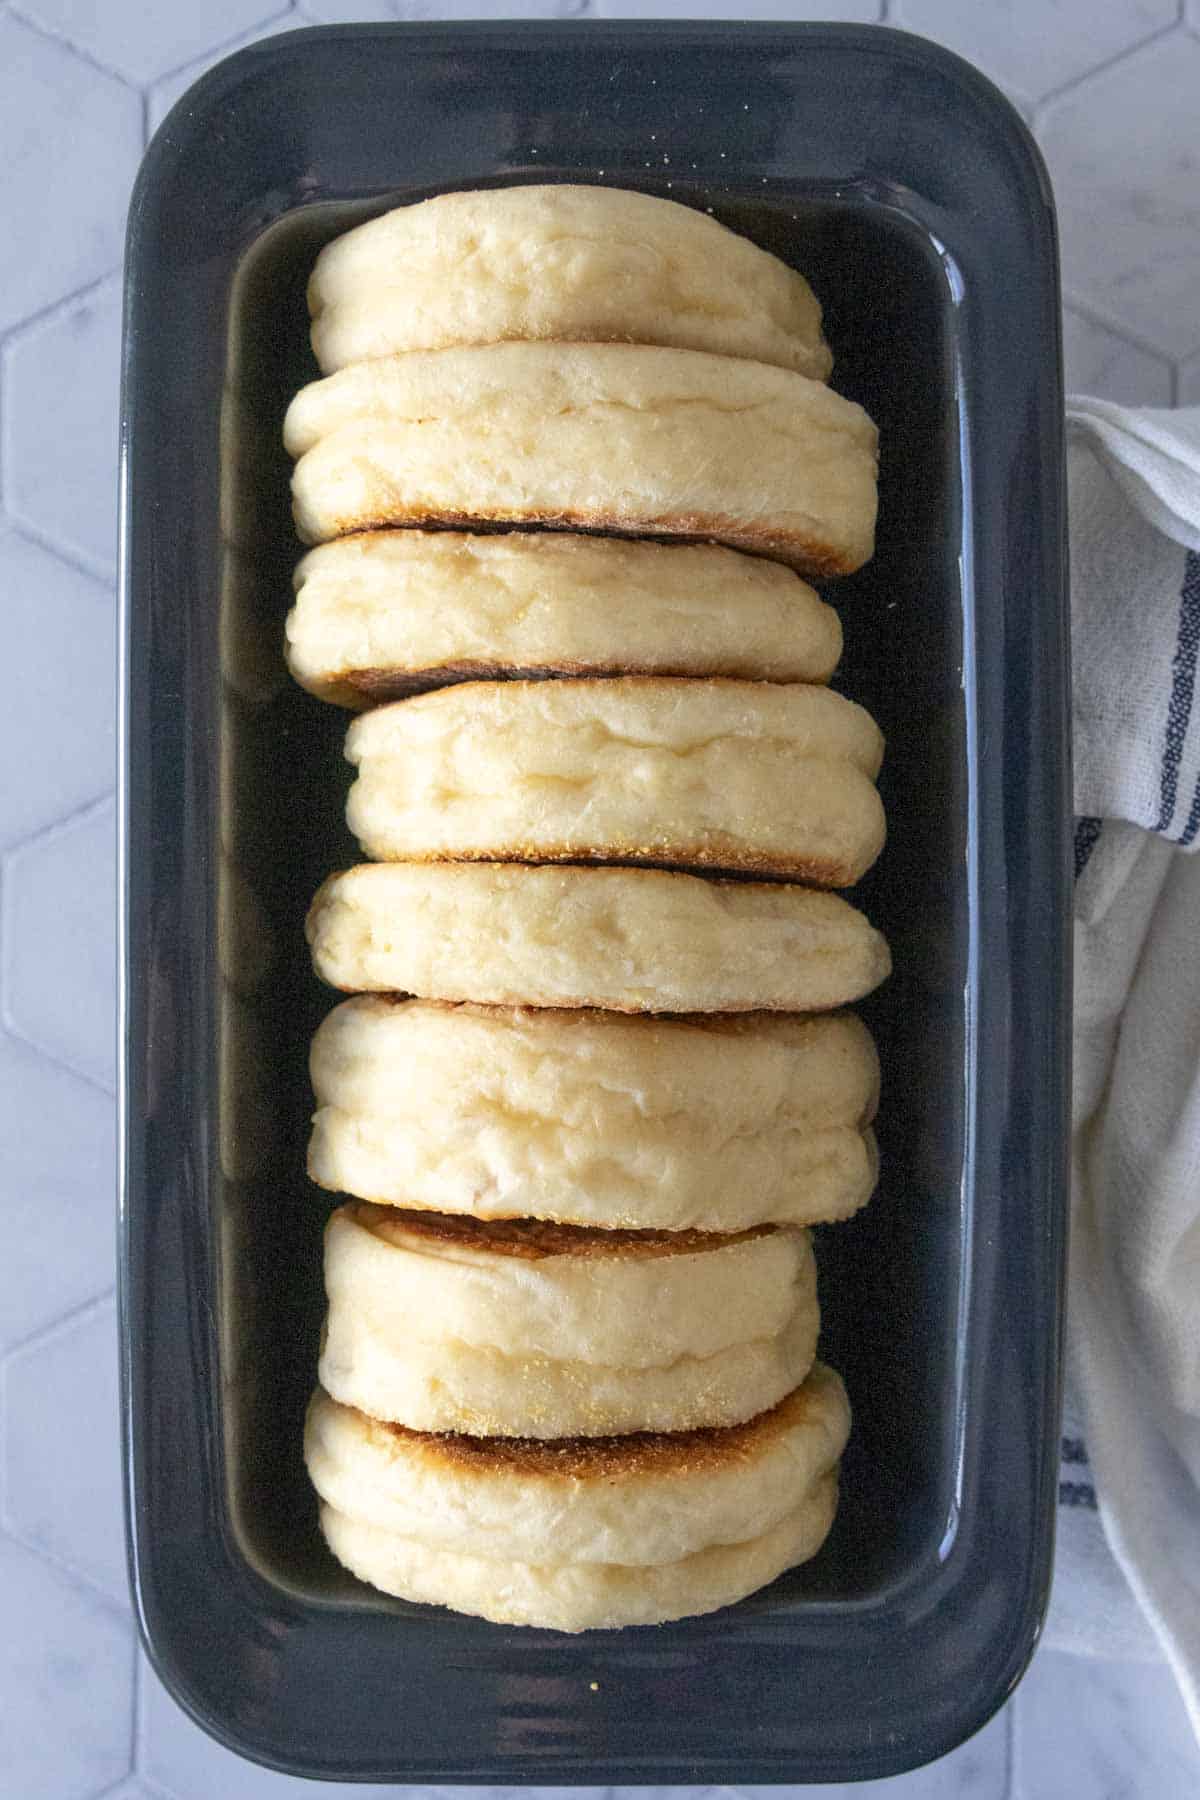 Homemade English muffins in a black ceramic loaf pan.